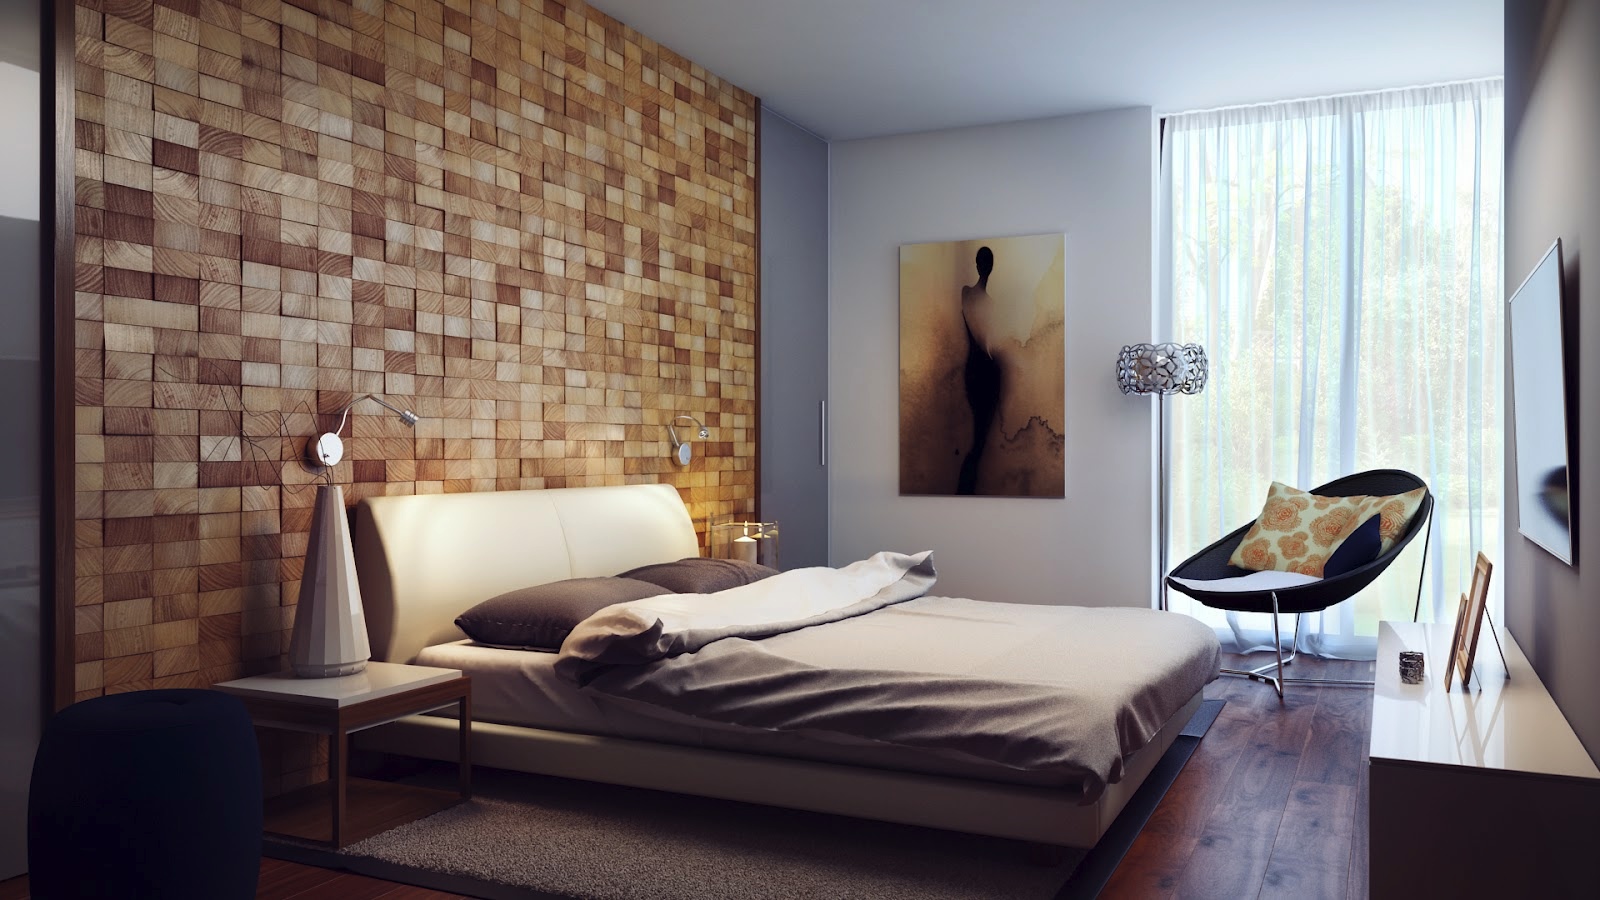 12 Modern Wall Designs Images